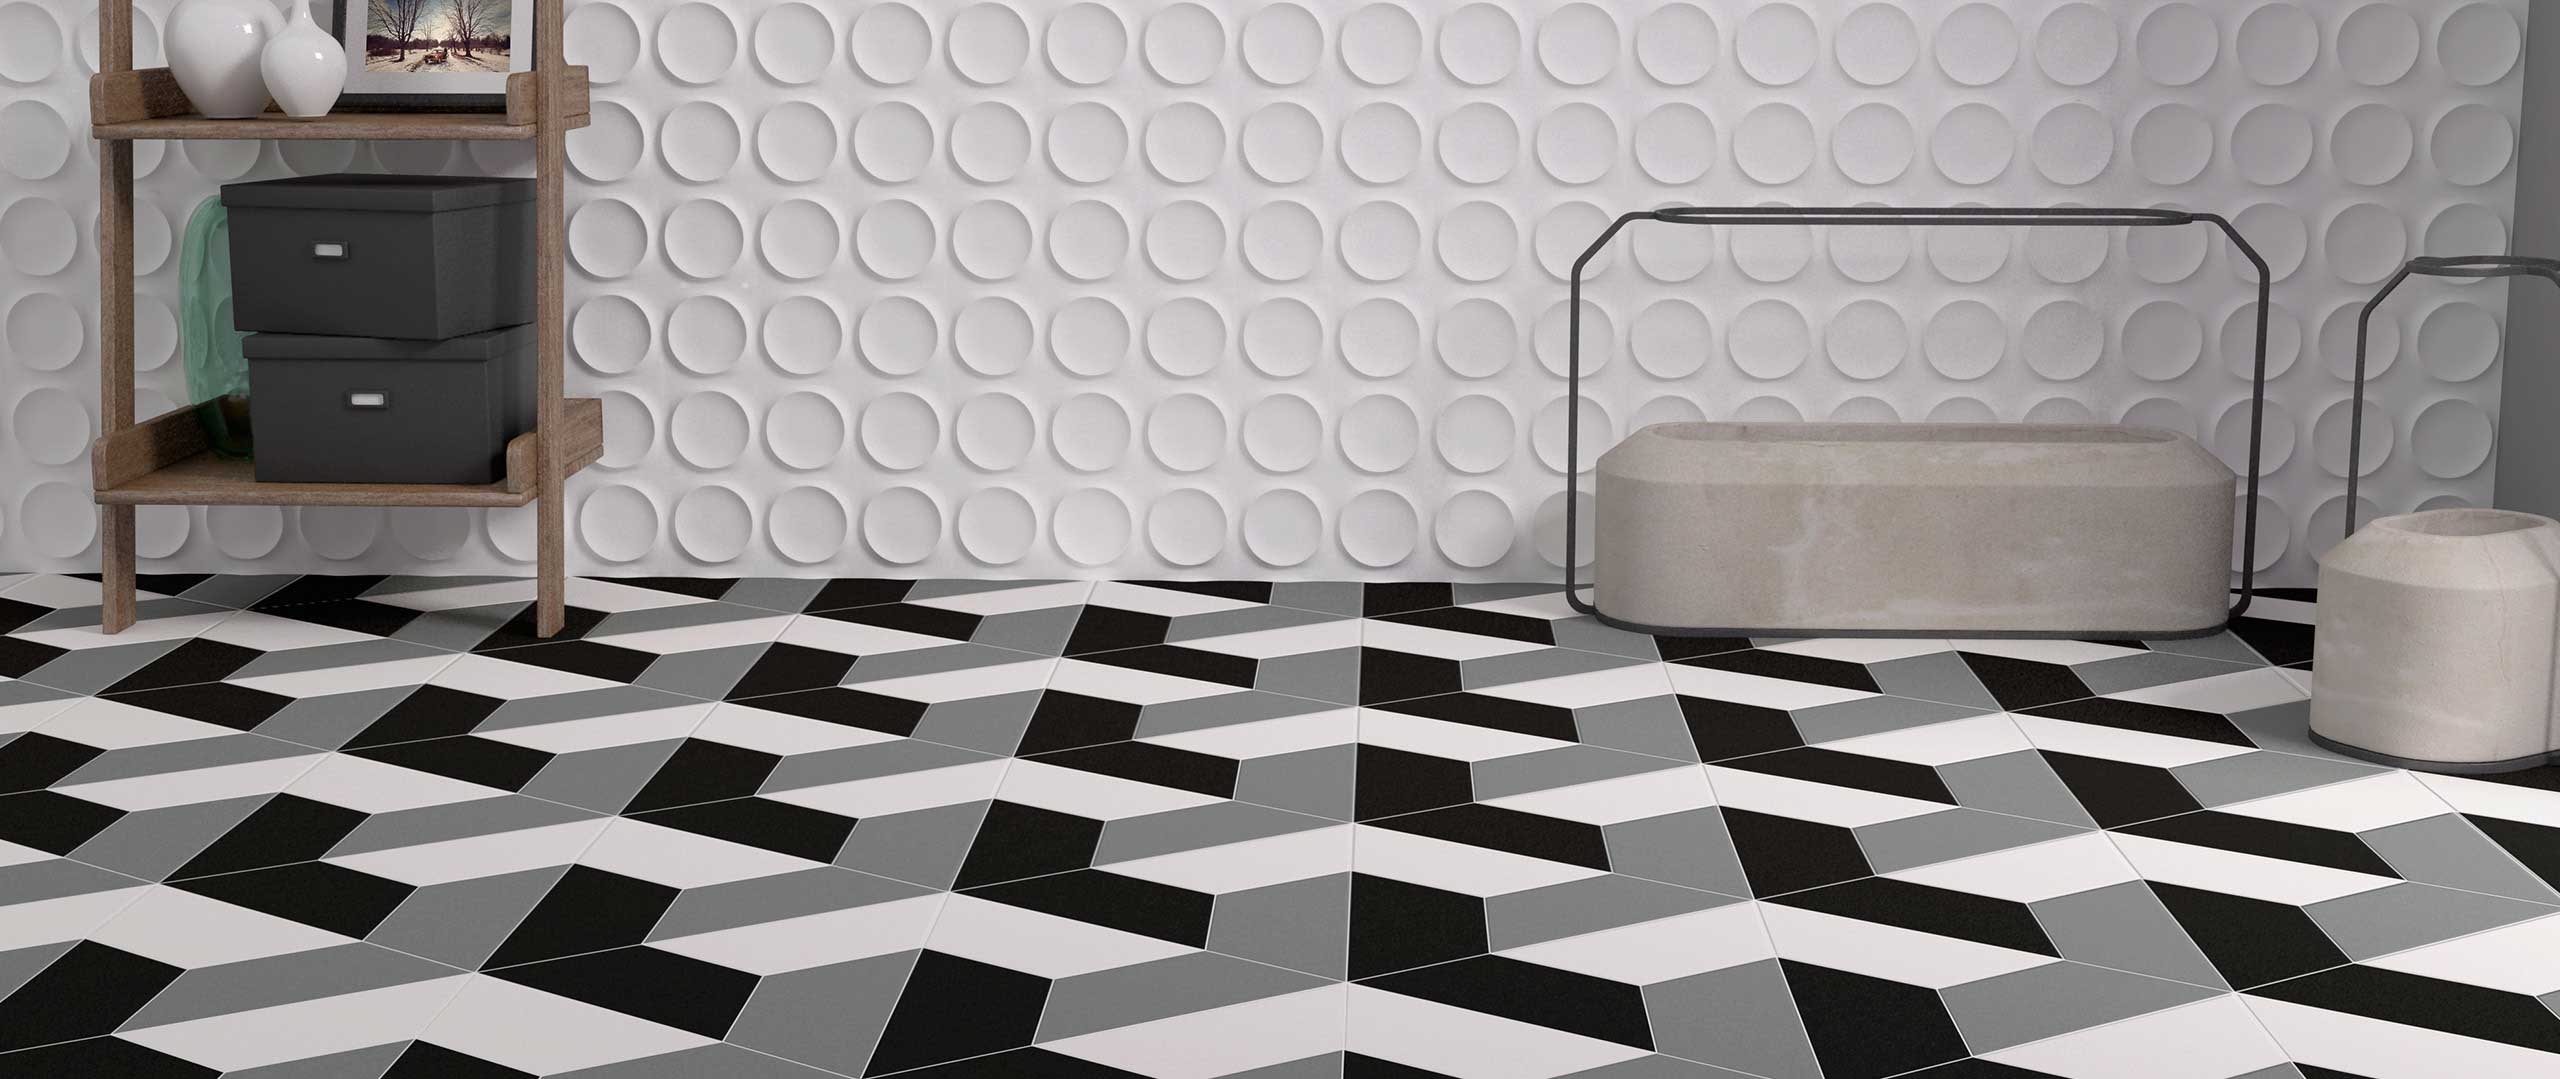 An Architect's Guide To: Ceramic Tile Flooring - Architizer Journal